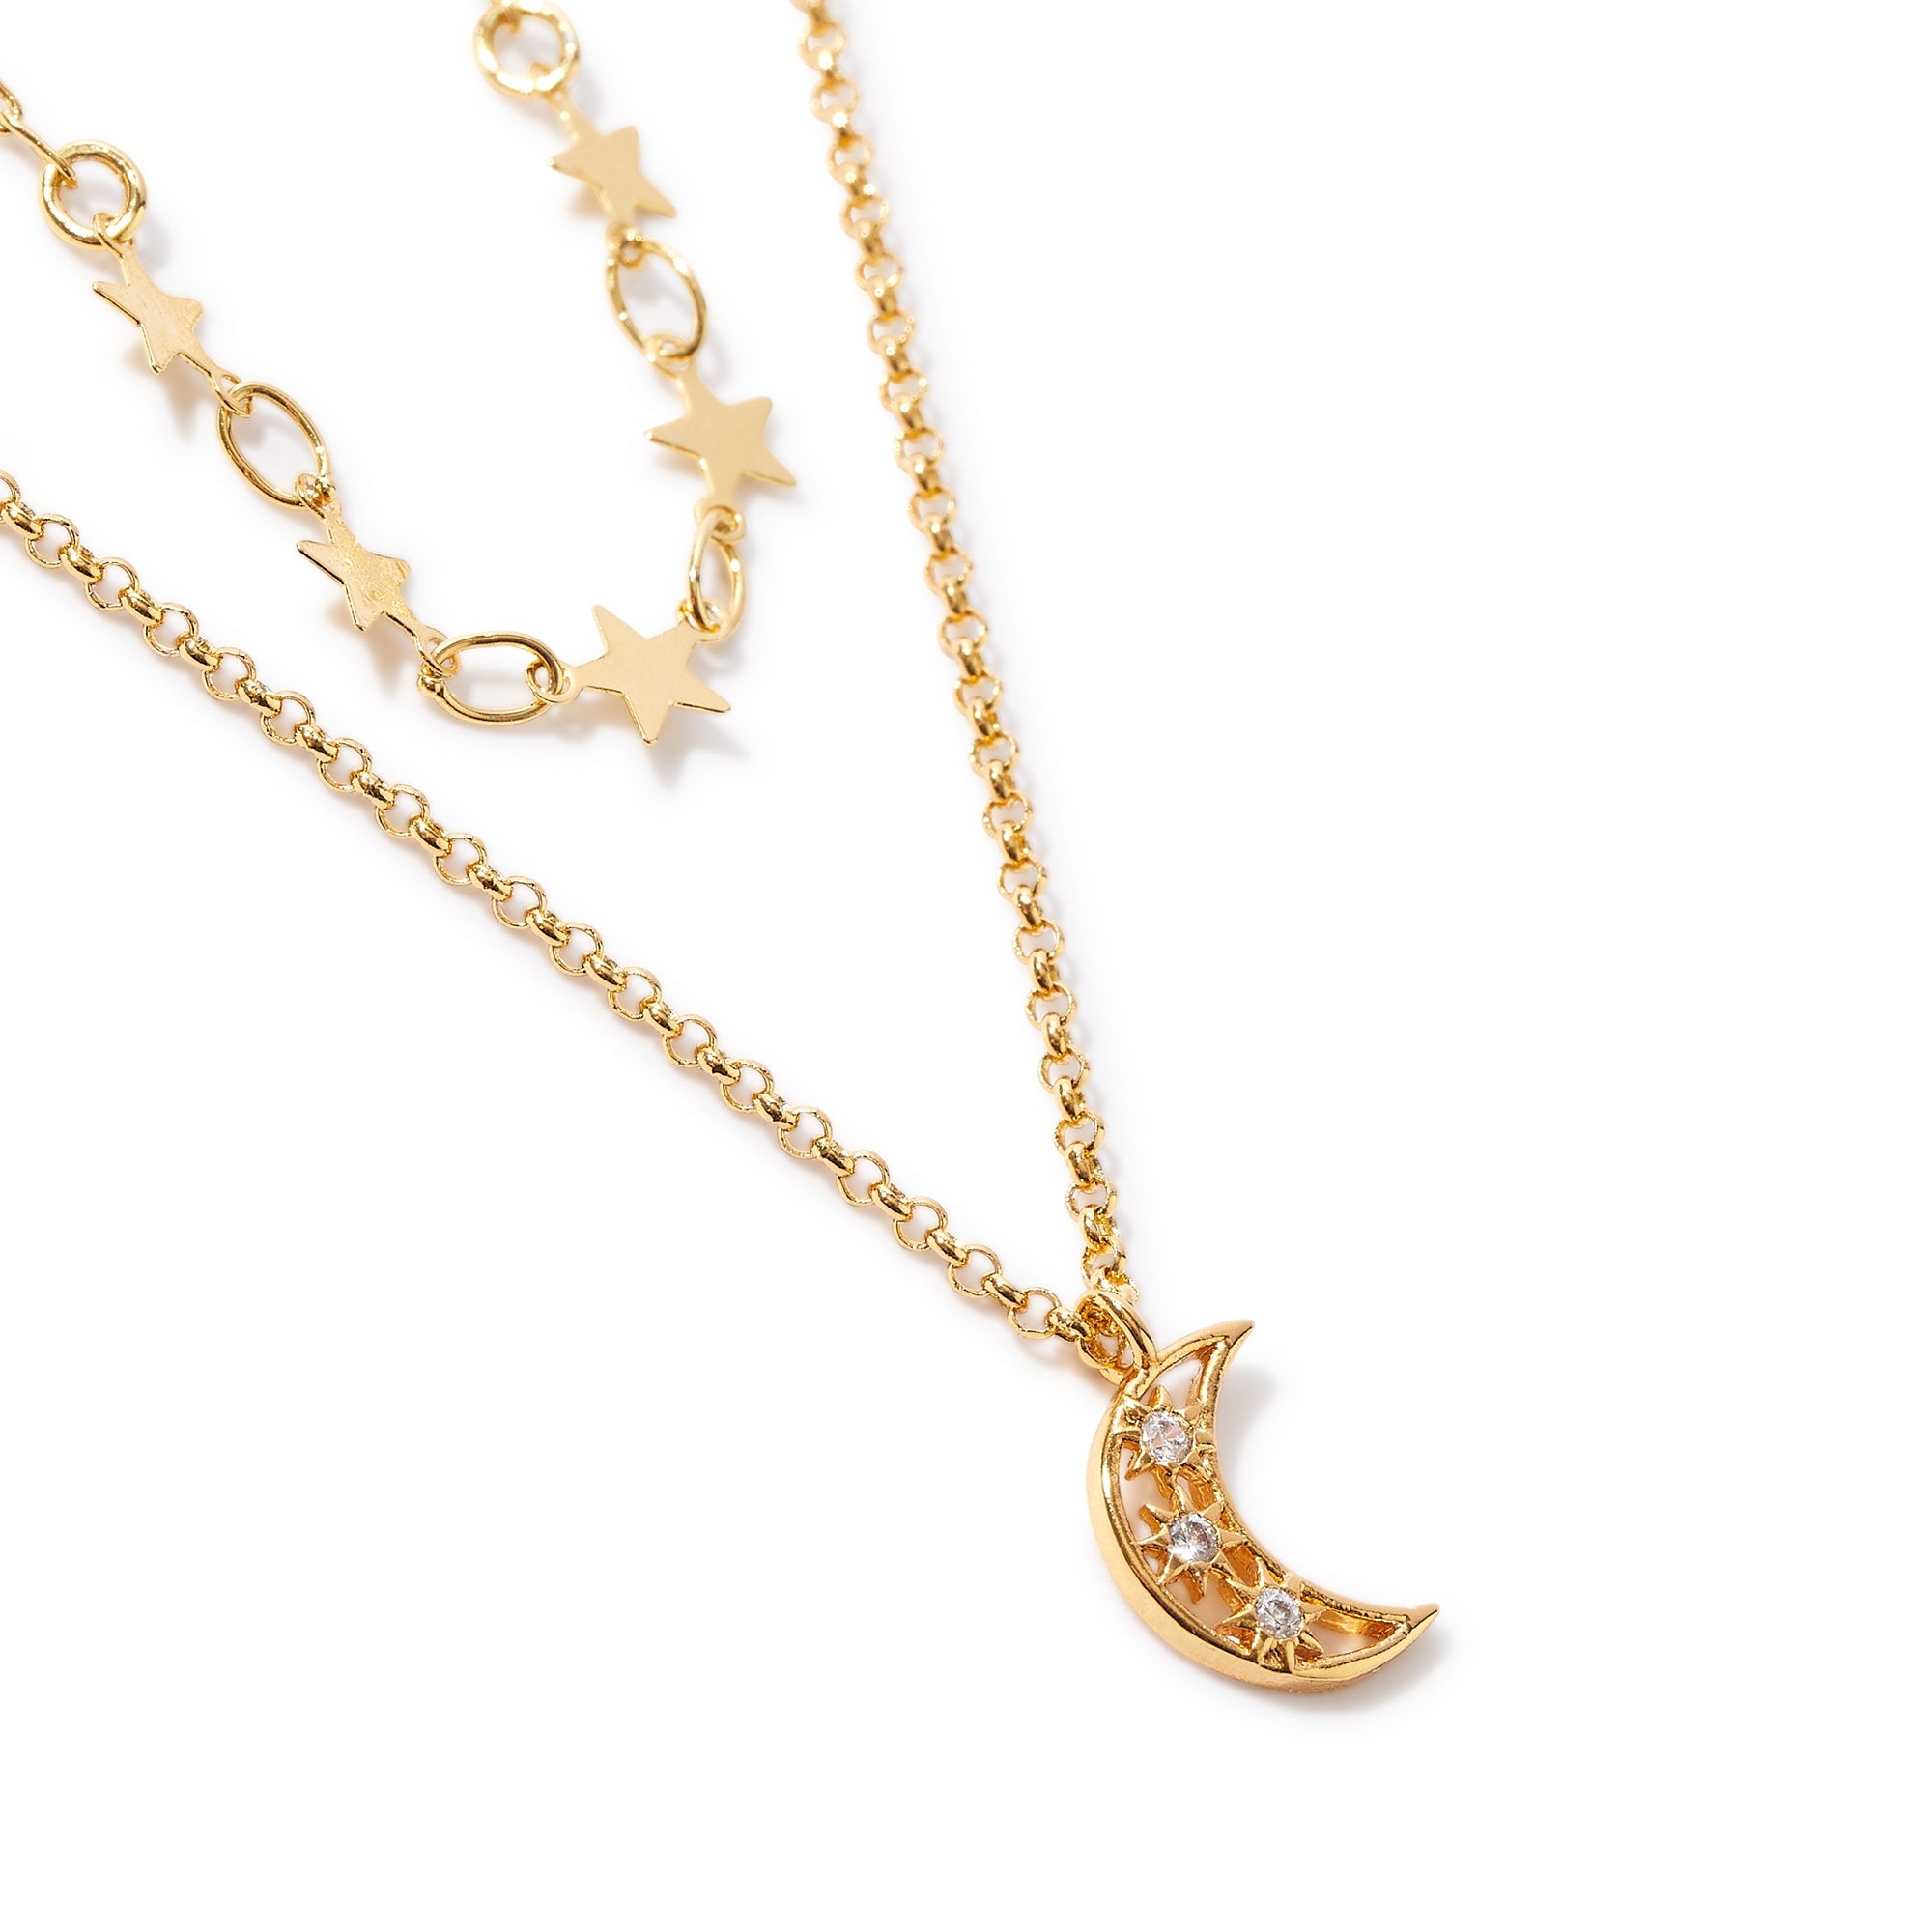 Real Gold Plated Celestial Layered Neclace For Women By Accessorize London